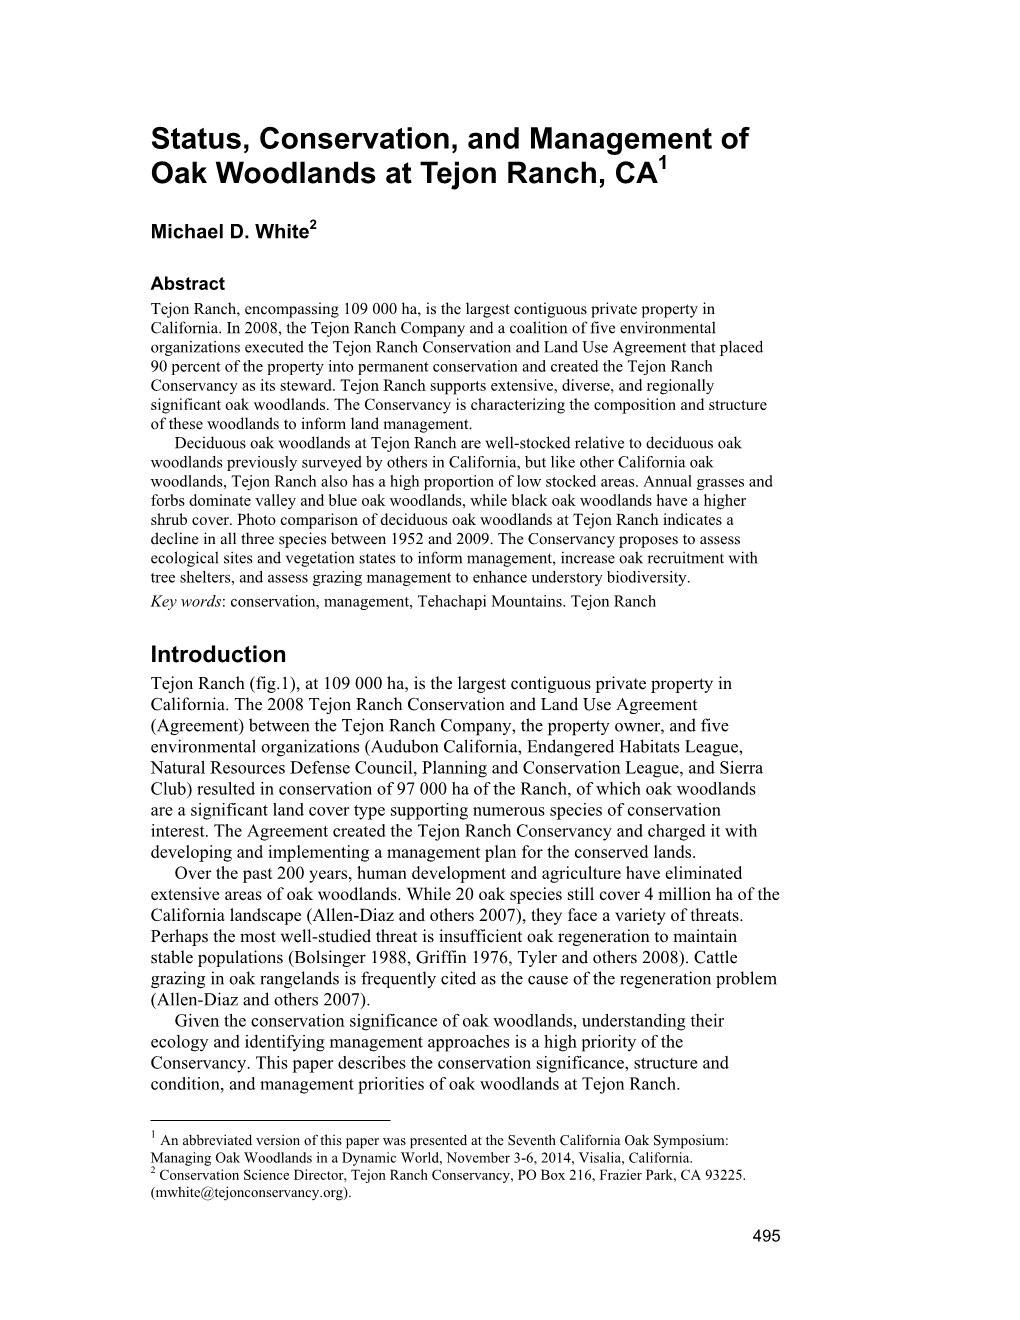 Status, Conservation, and Management of Oak Woodlands at Tejon Ranch, CA1